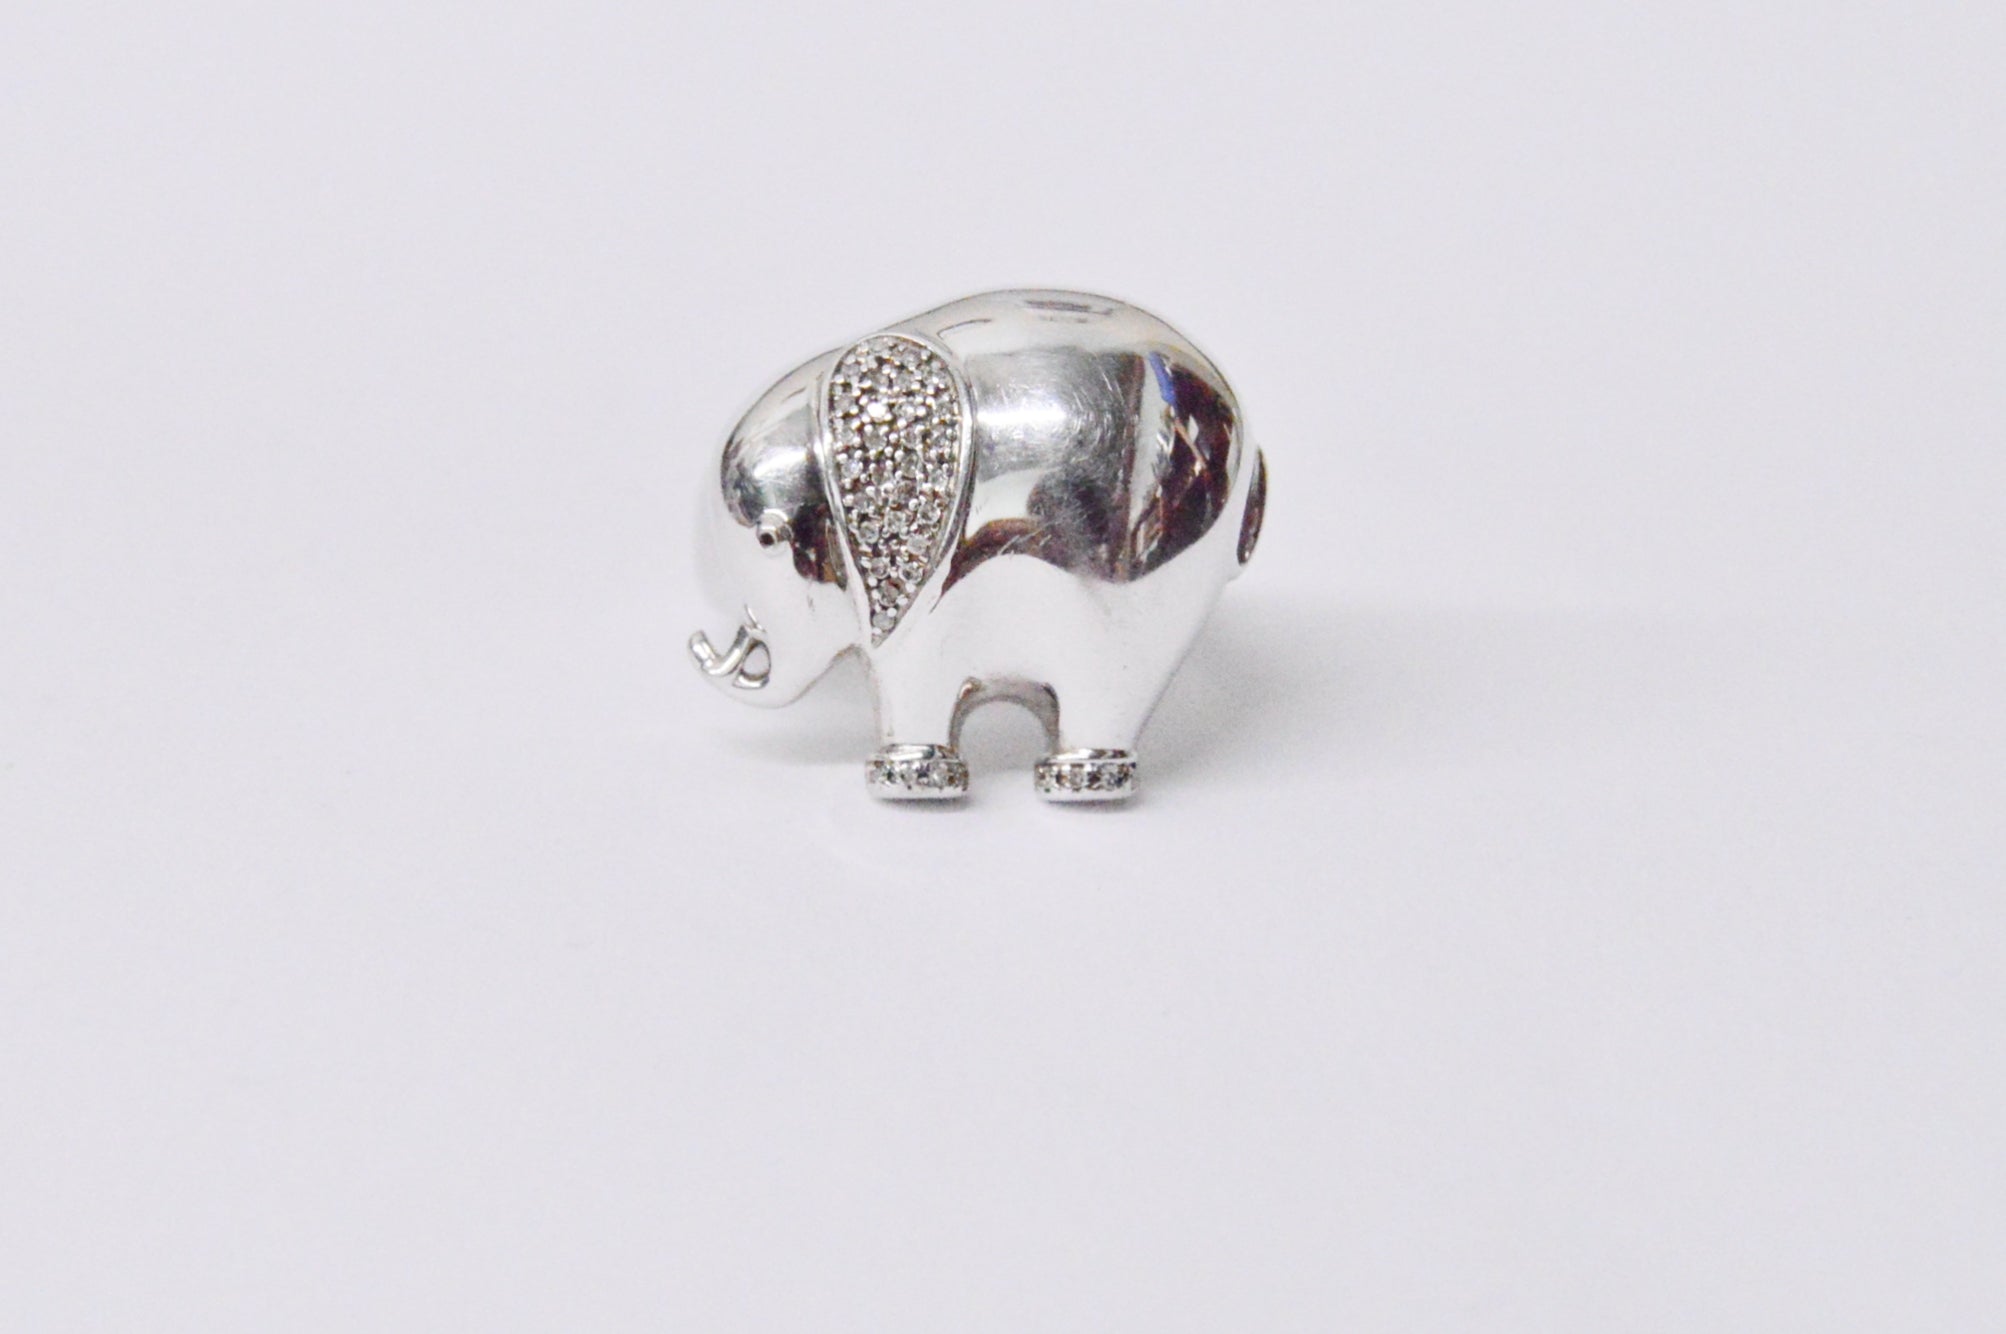 Diamond Elephant .925 Sterling Silver Ring www.hersandhistreasures.com/collections/sterling-silver-jewelry